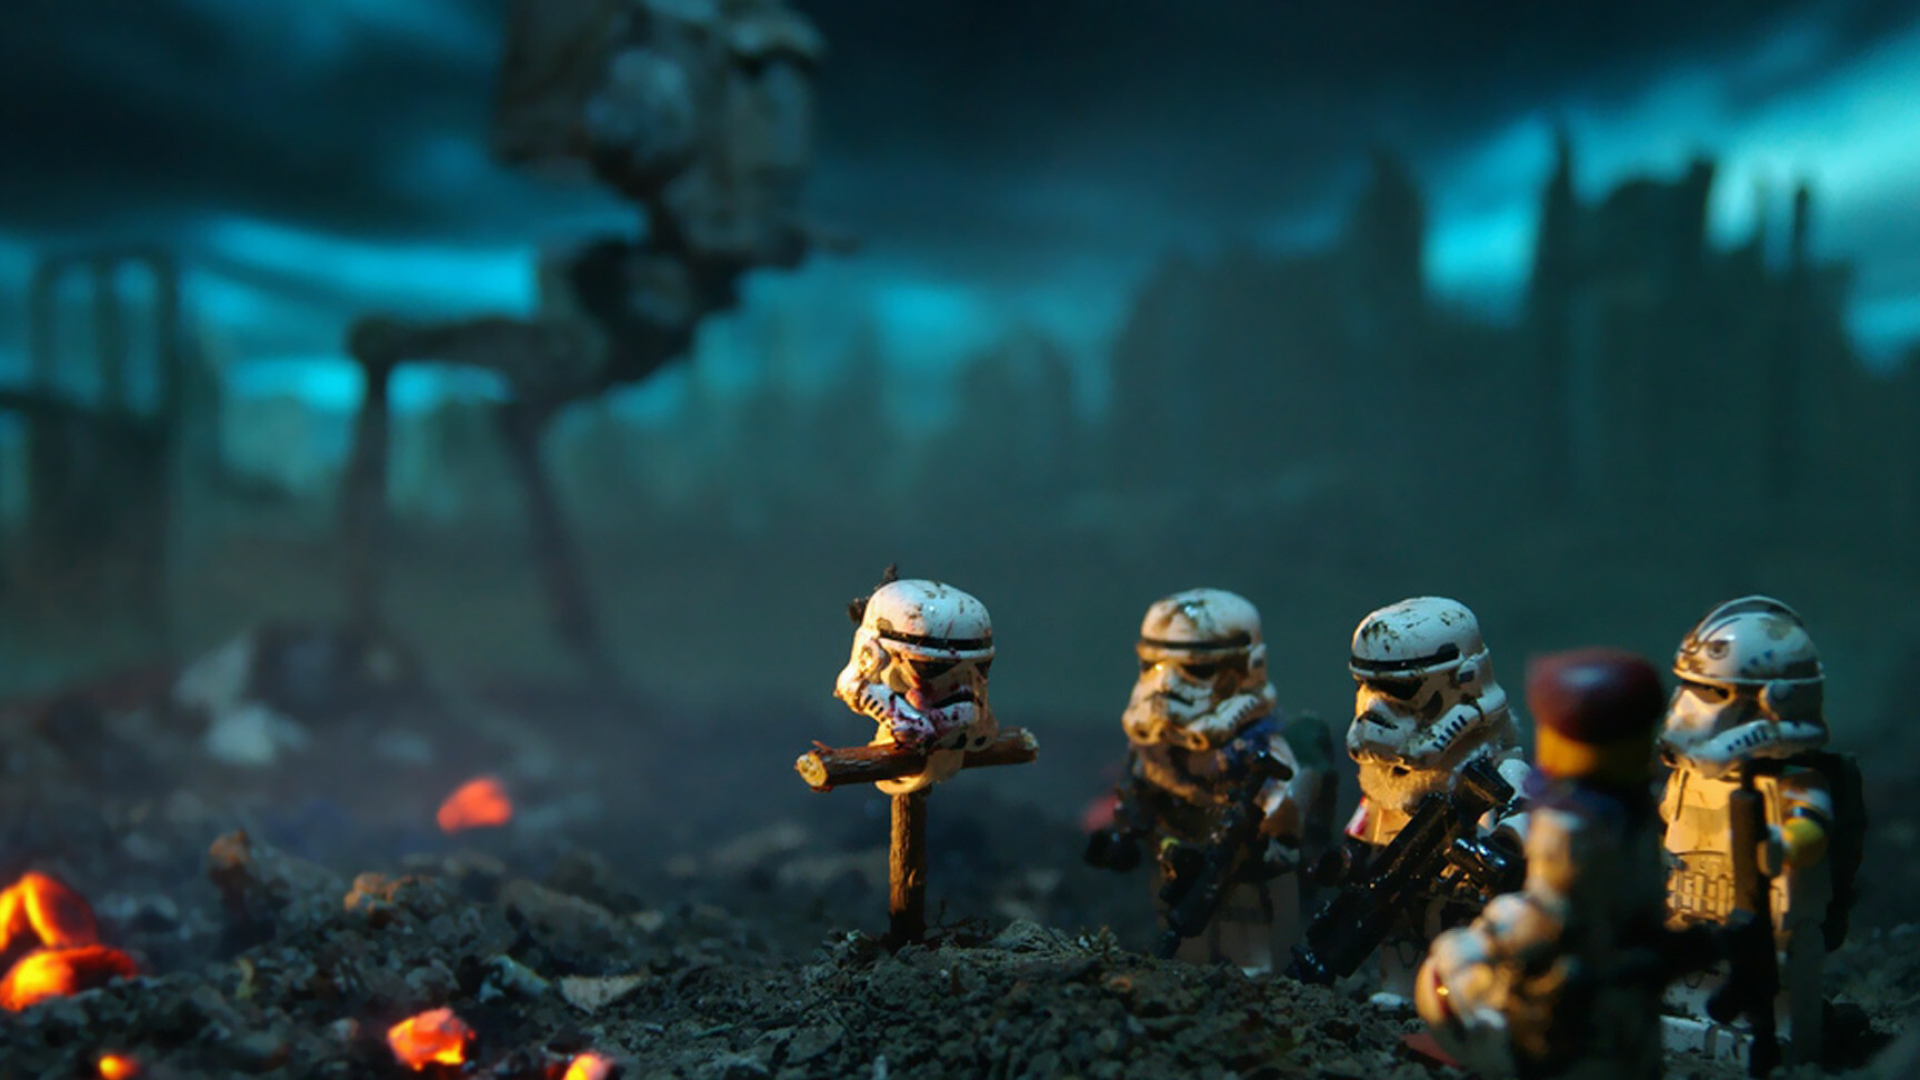 Lego: Stormtroopers, Minifigures were first produced in 1978. 1920x1080 Full HD Background.